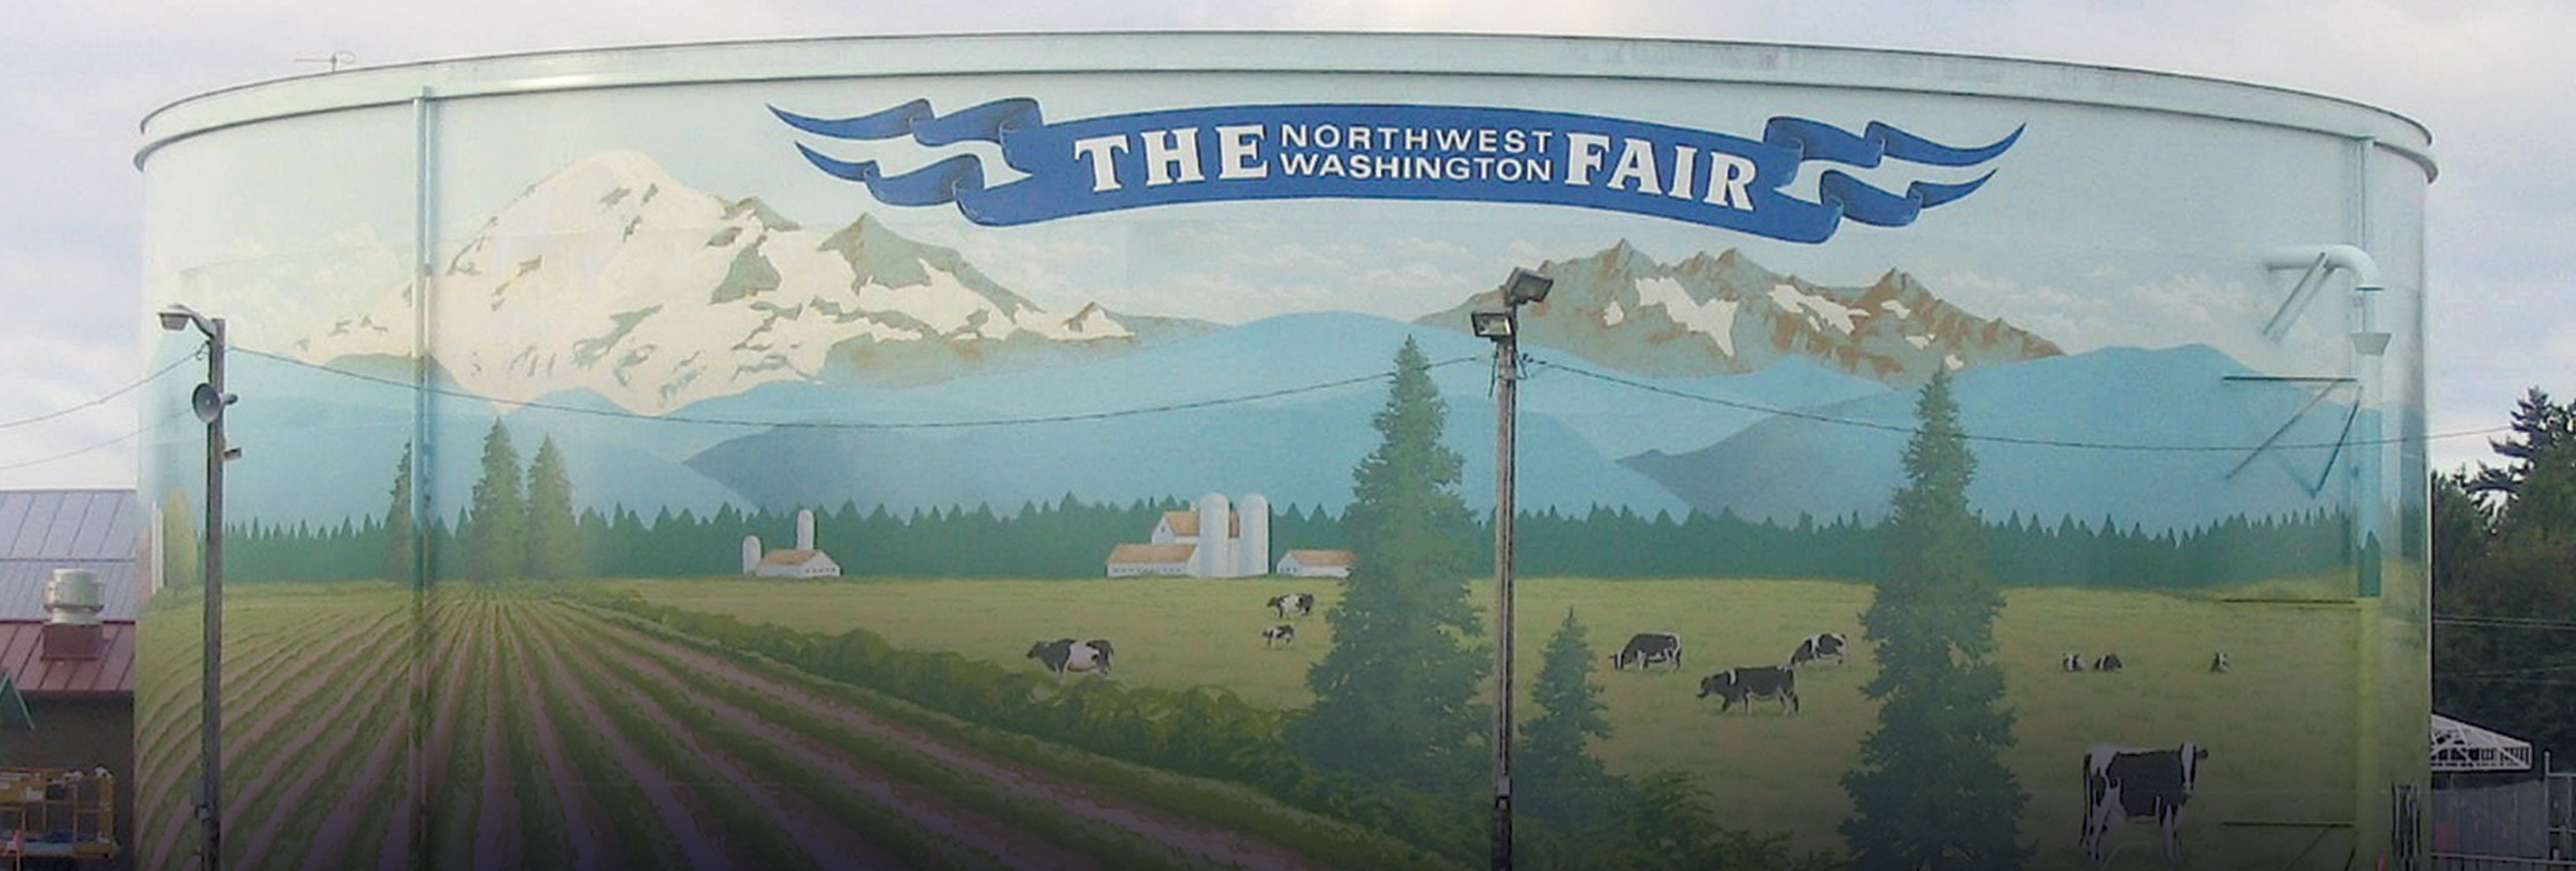 The Goetzinger brothers are masters of public water tank murals. Their special touch has created a new landmark Lynden, Washington.